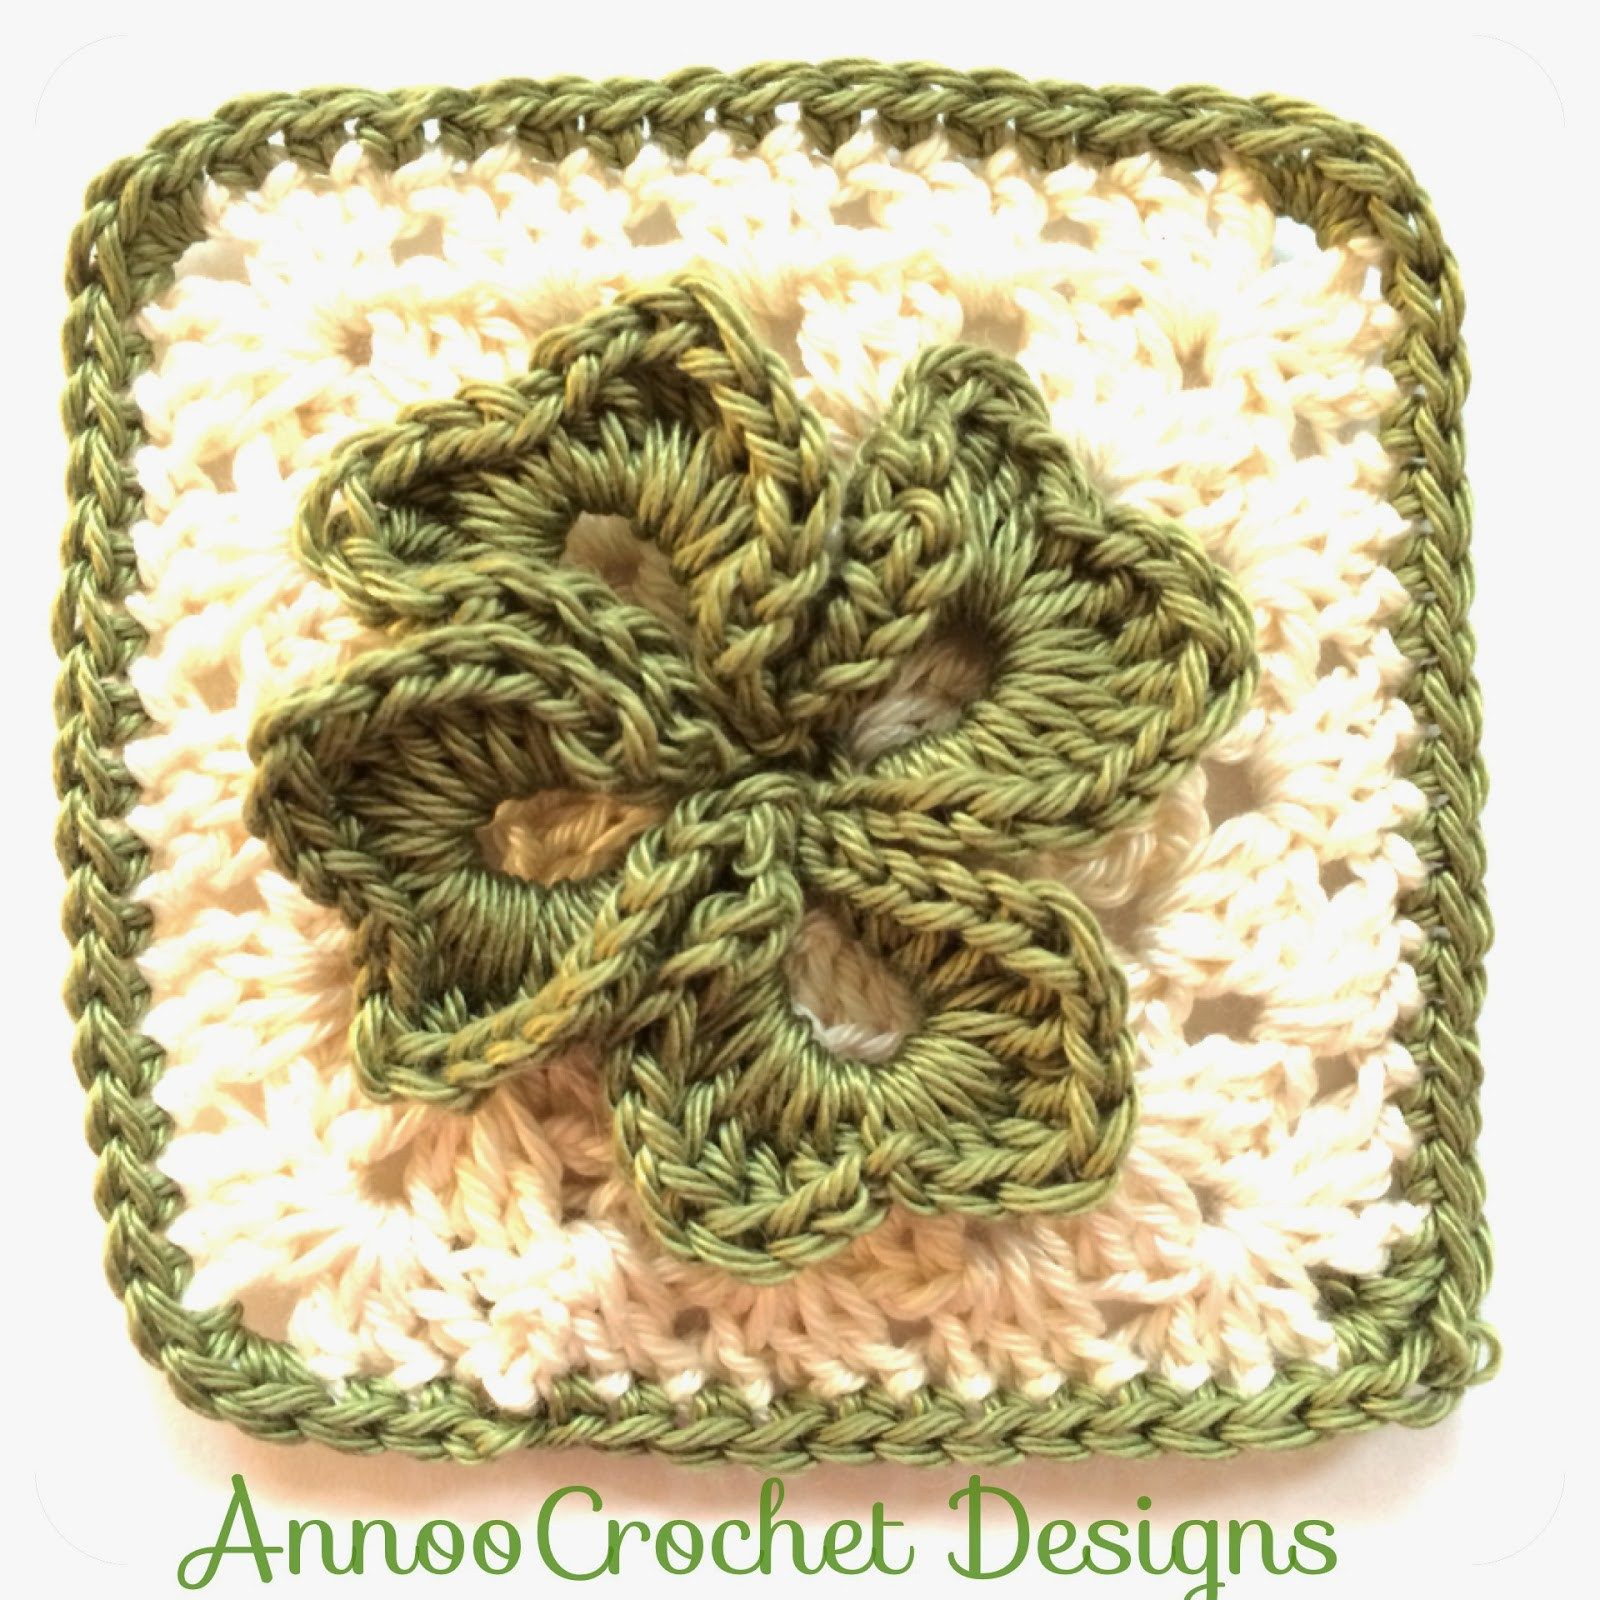 Clover Crochet Pattern Lucky And Free Shamrock Crochet Patterns Granny Squares